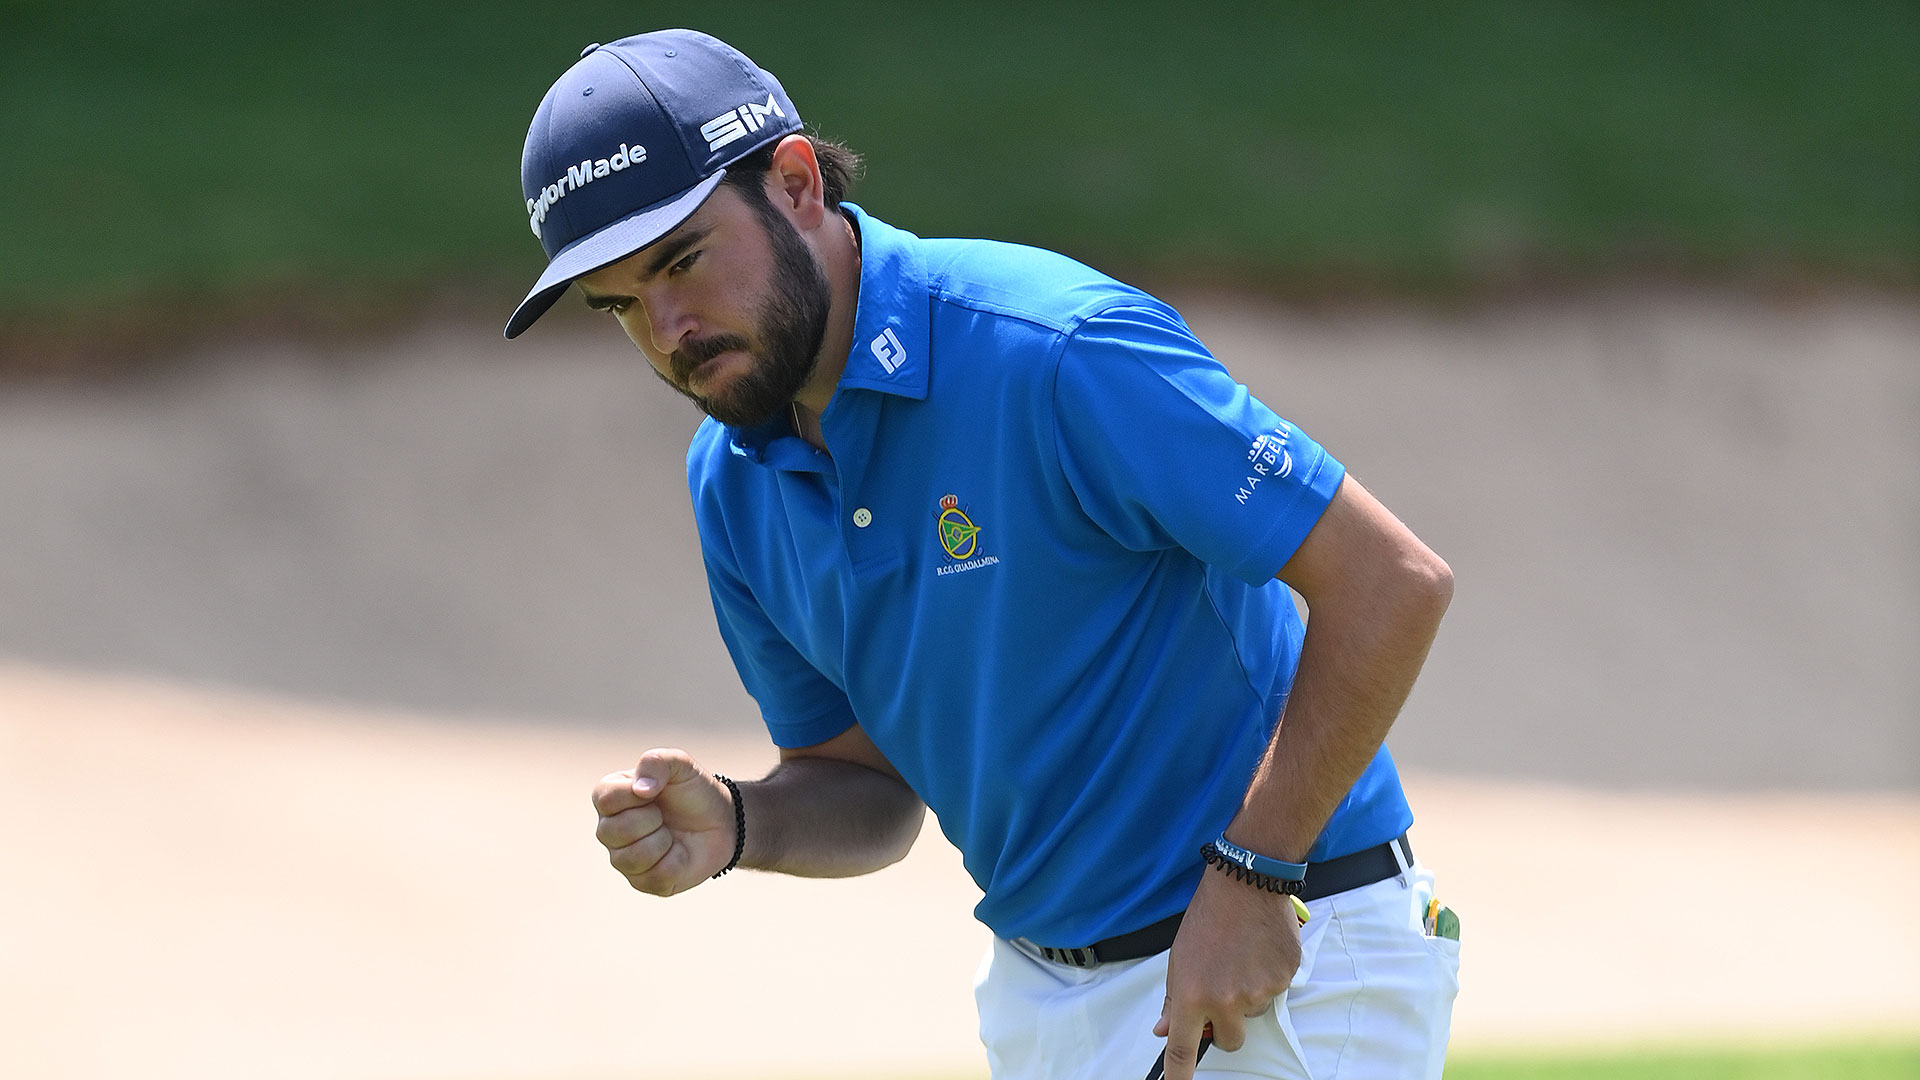 Angel Hidalgo leads in South Africa as DP World Tour makes debut